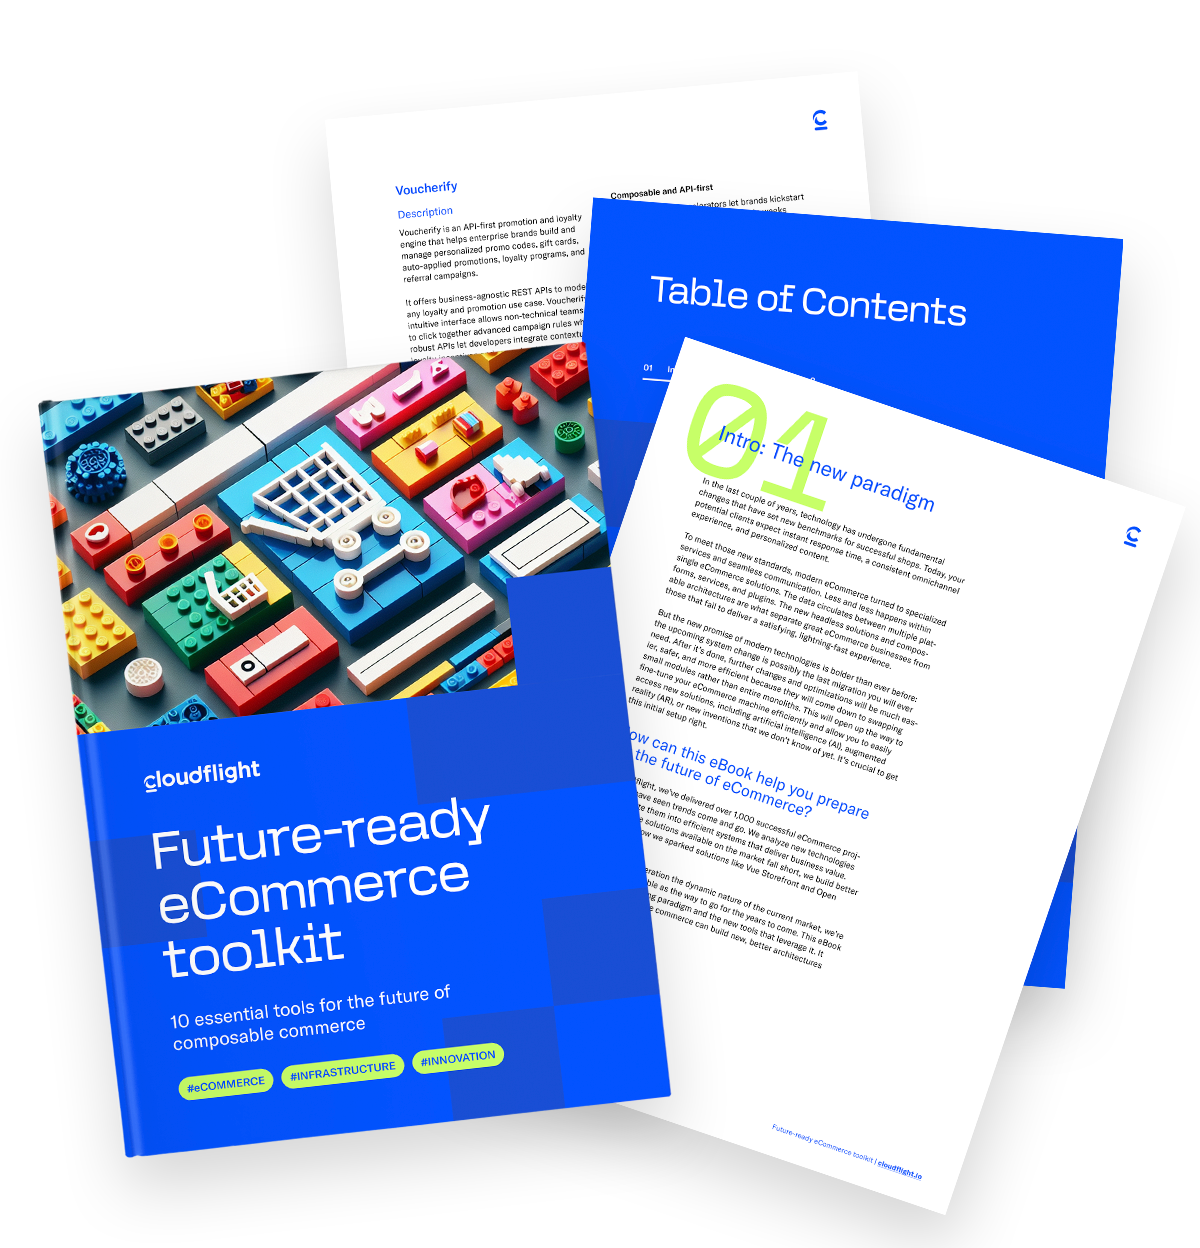 Future-ready-ecommerce-toolkit-template_covers_social